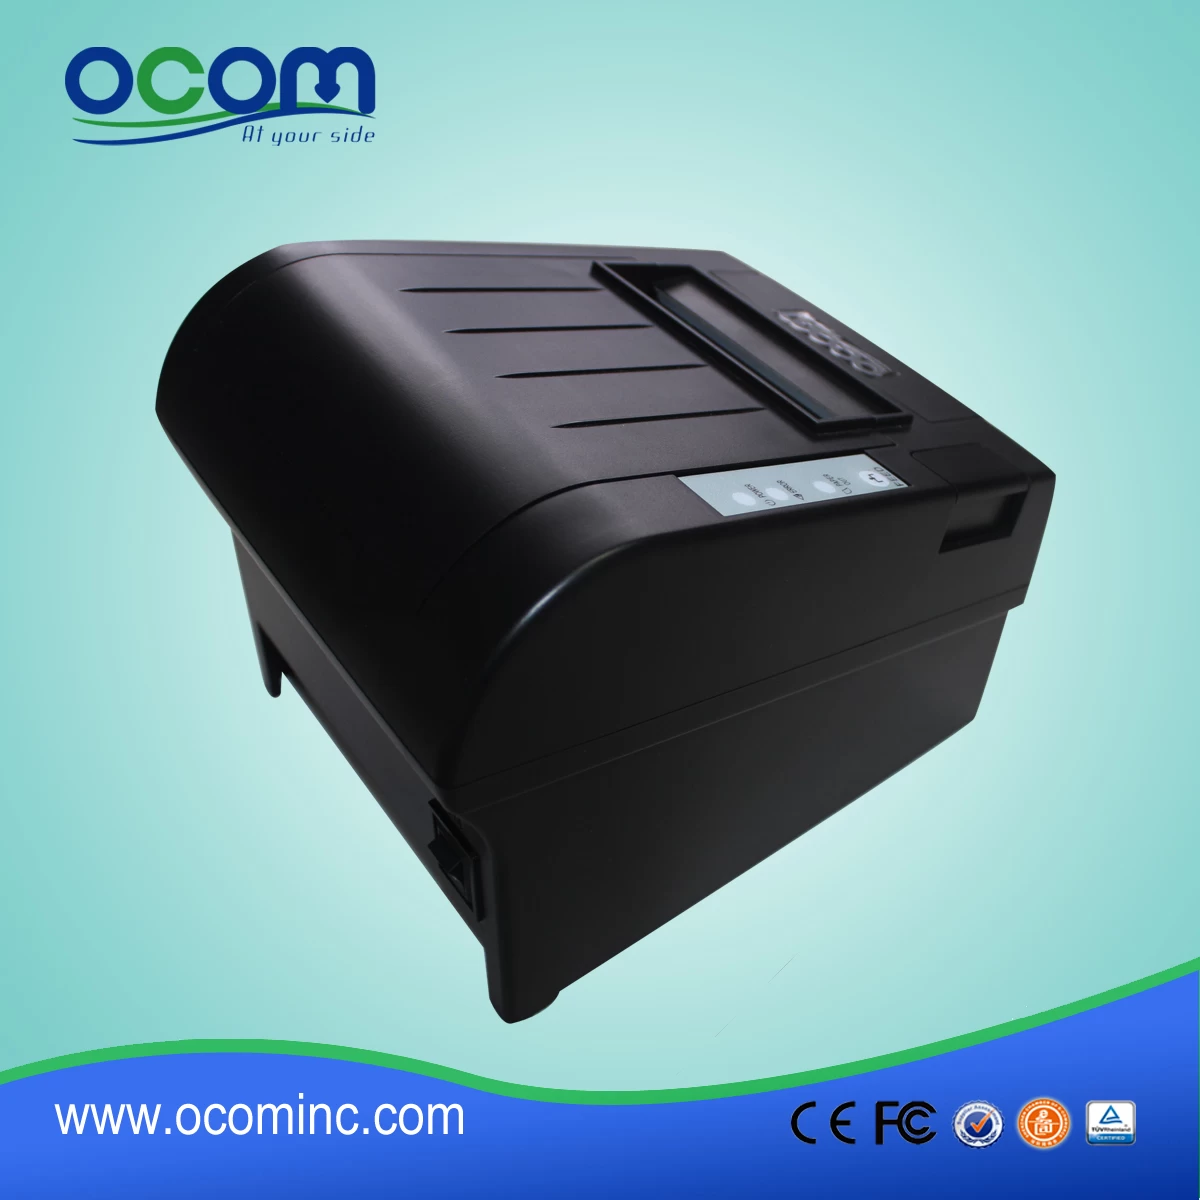 3 inch Android 1D and QR code Thermal Printer--OCPP-806